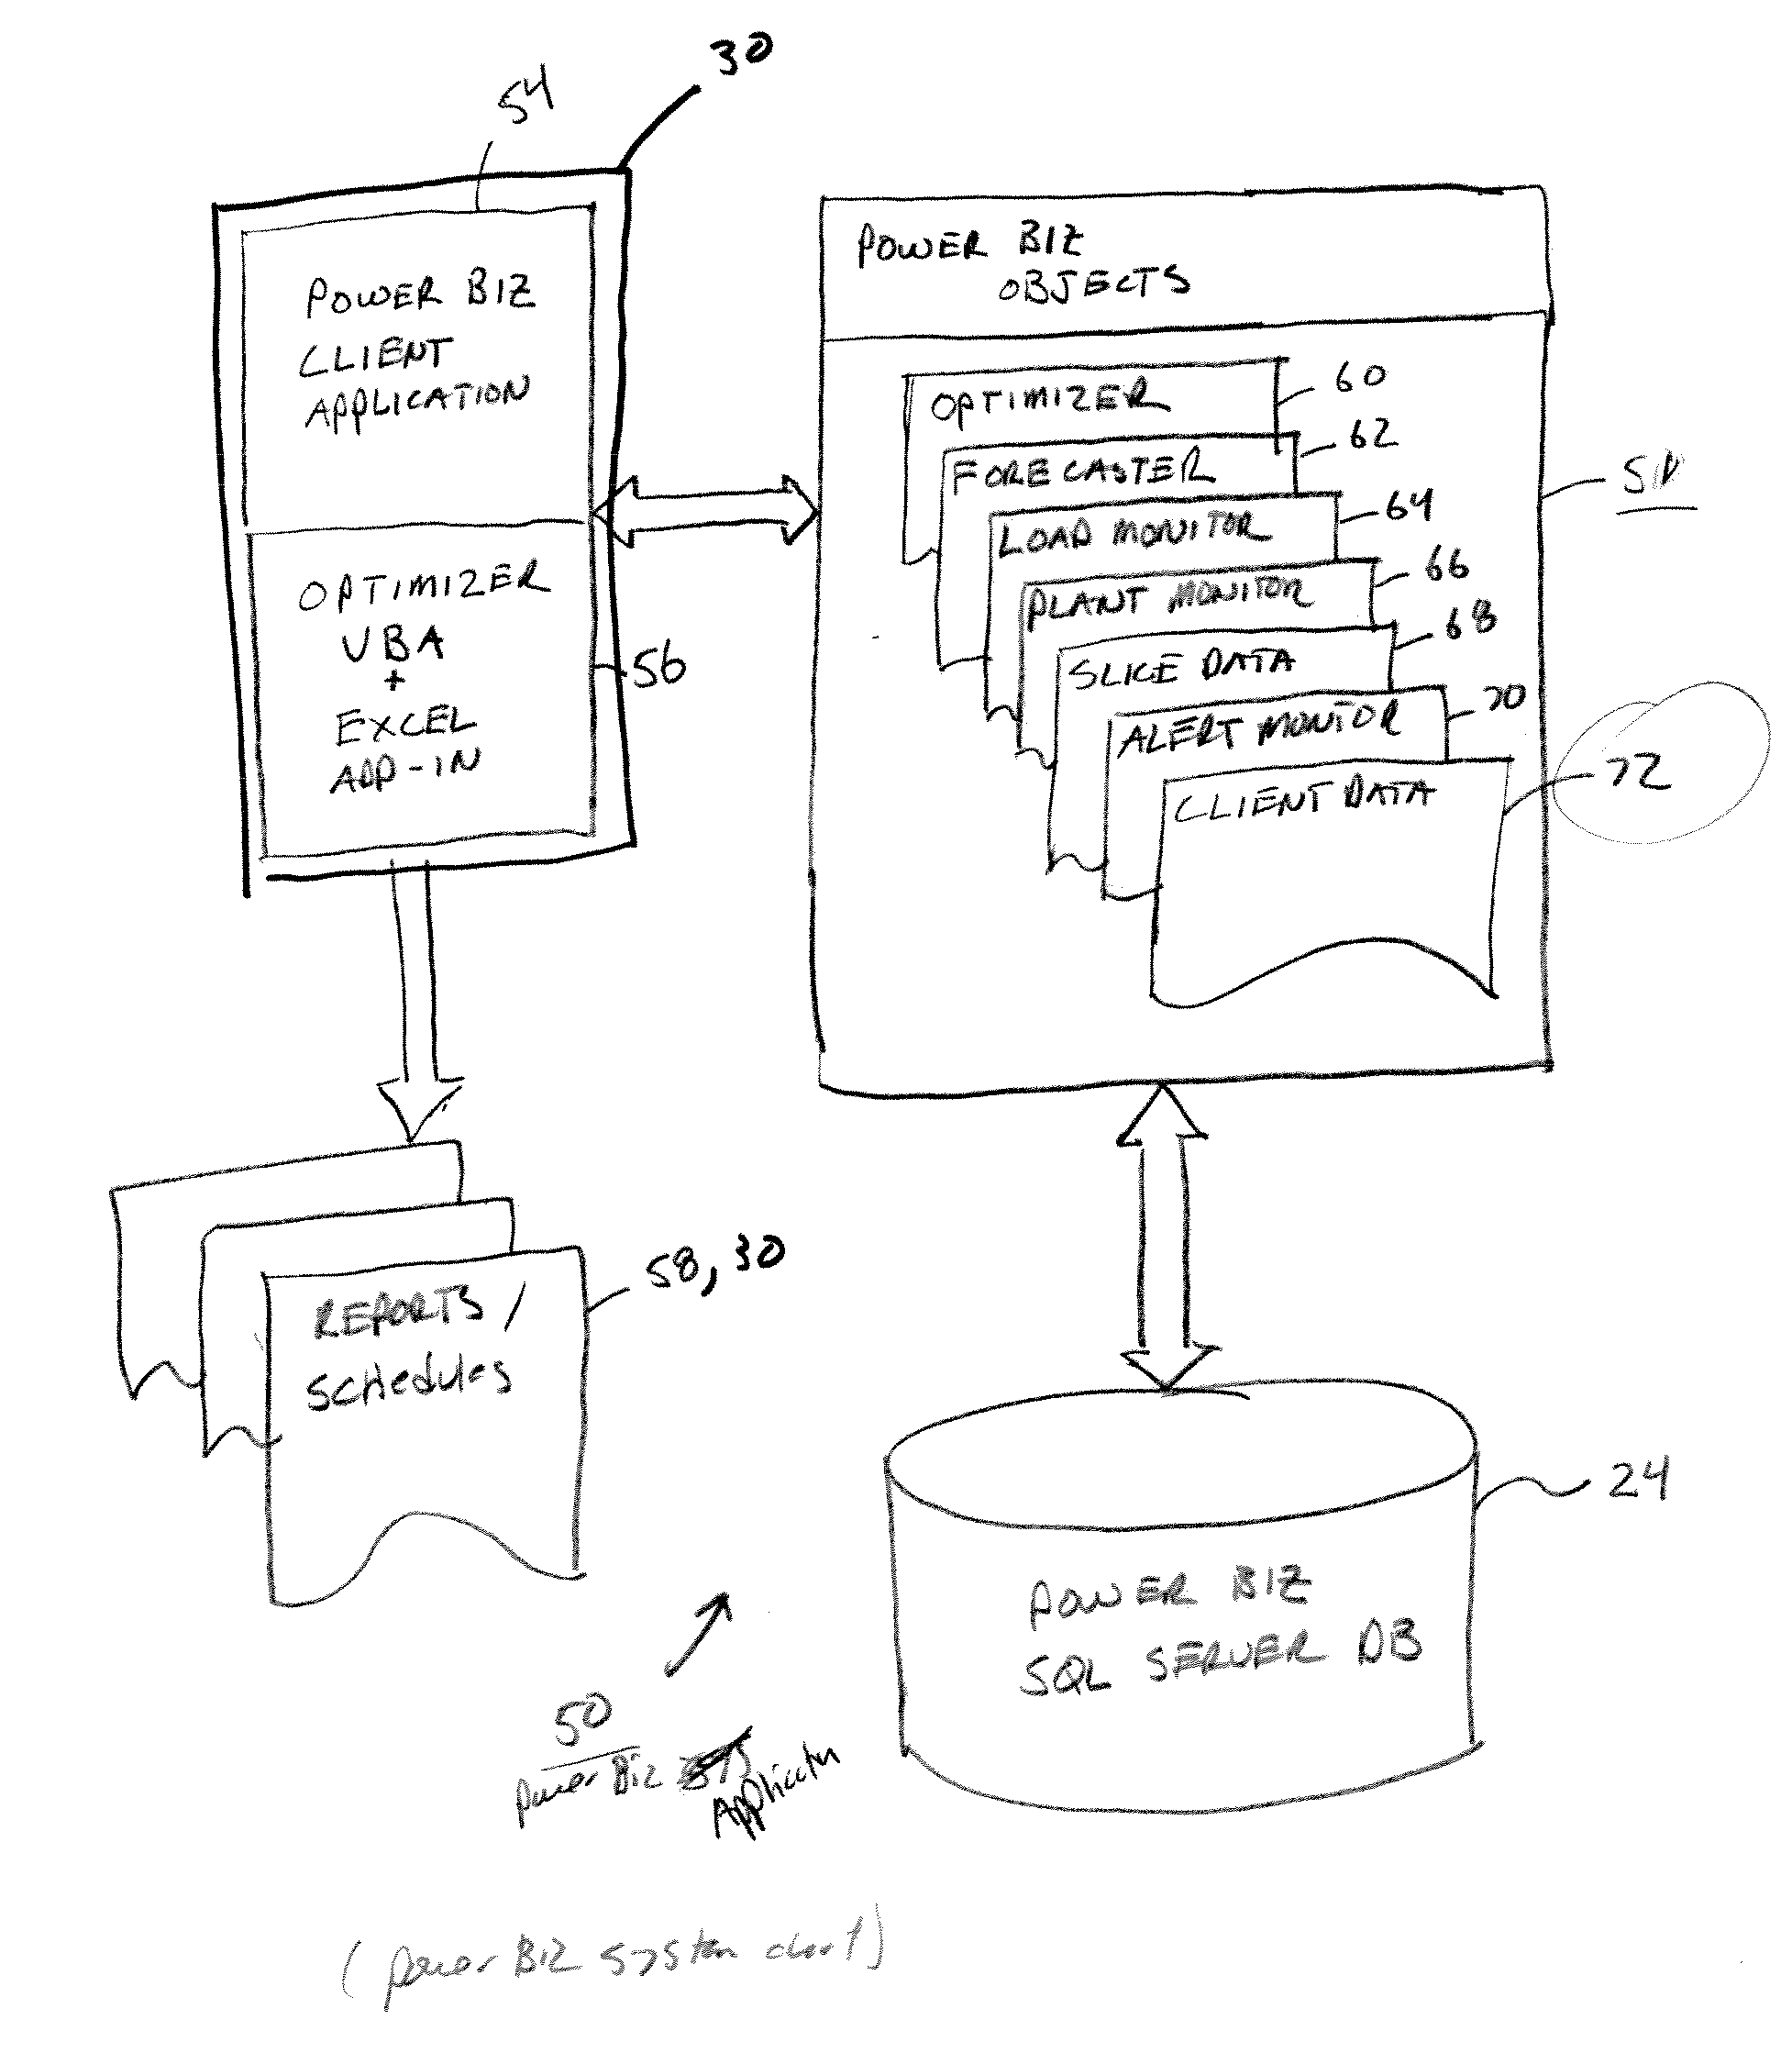 System and method for managing and optimizing power use